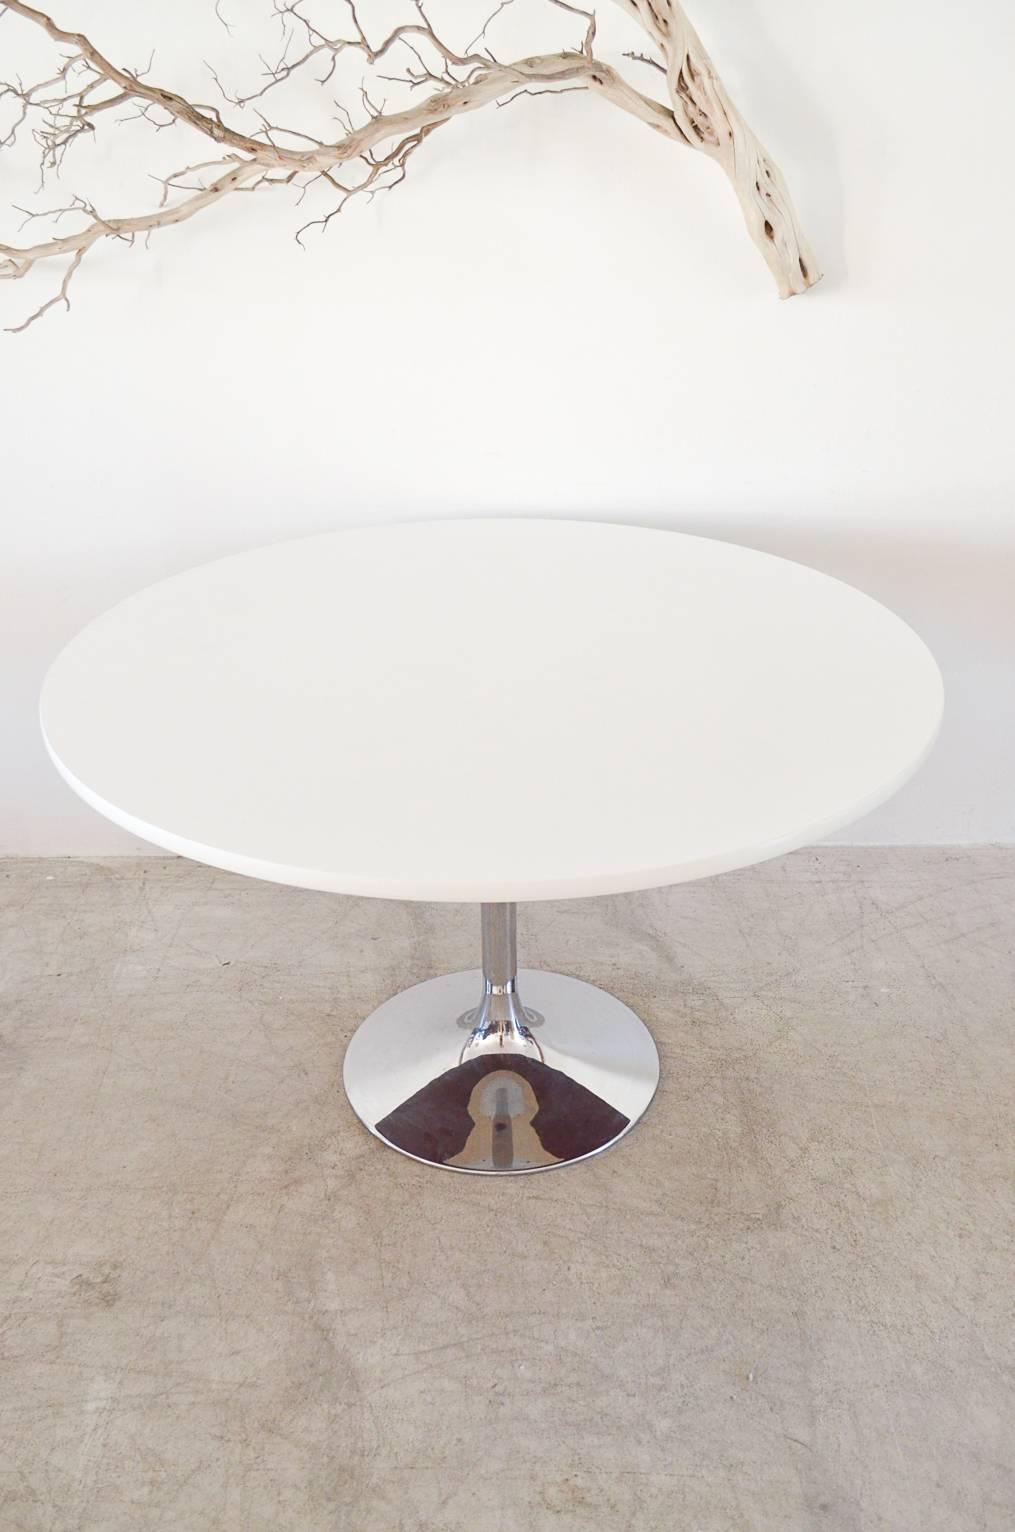 Beautiful vintage white laminate bistro or dining table with chrome pedestal base and white laminate top. Very good condition, laminate is clean with no peeling or pitting. Chrome base is also excellent with no pitting to chrome. 

Very light